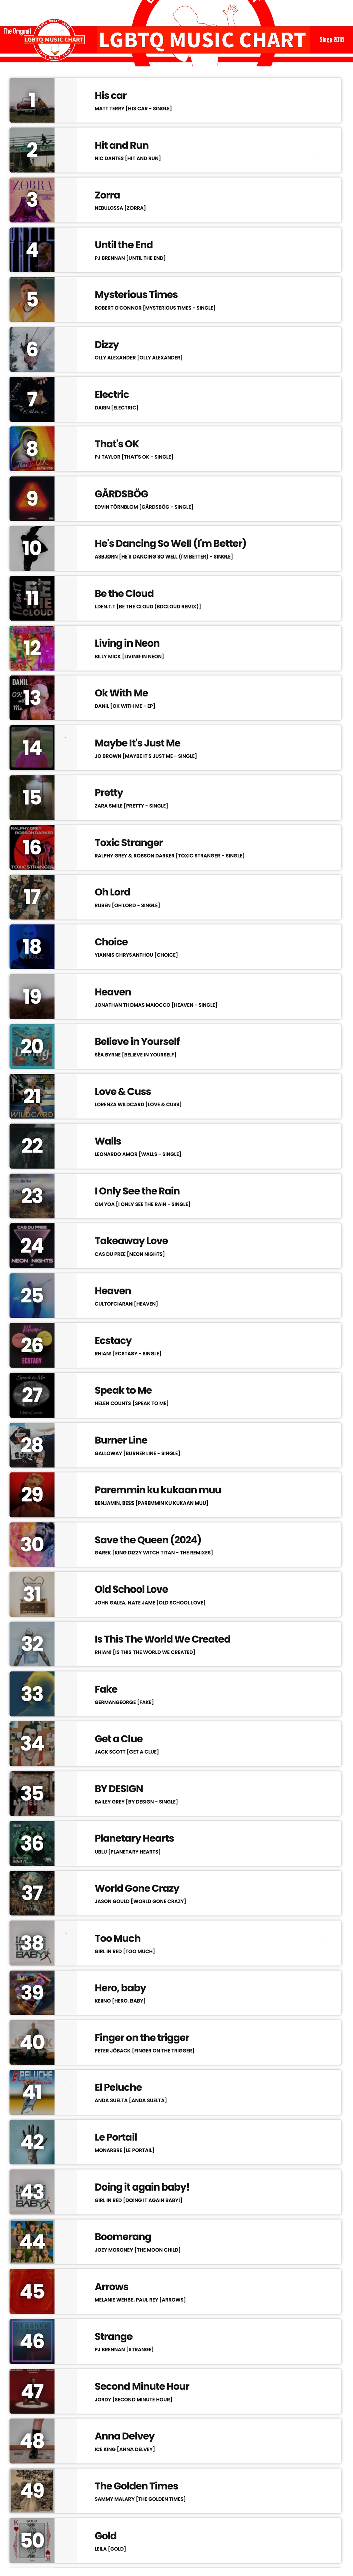 Showing top 50 of LGBTQ Music Chart for Week 18 2024